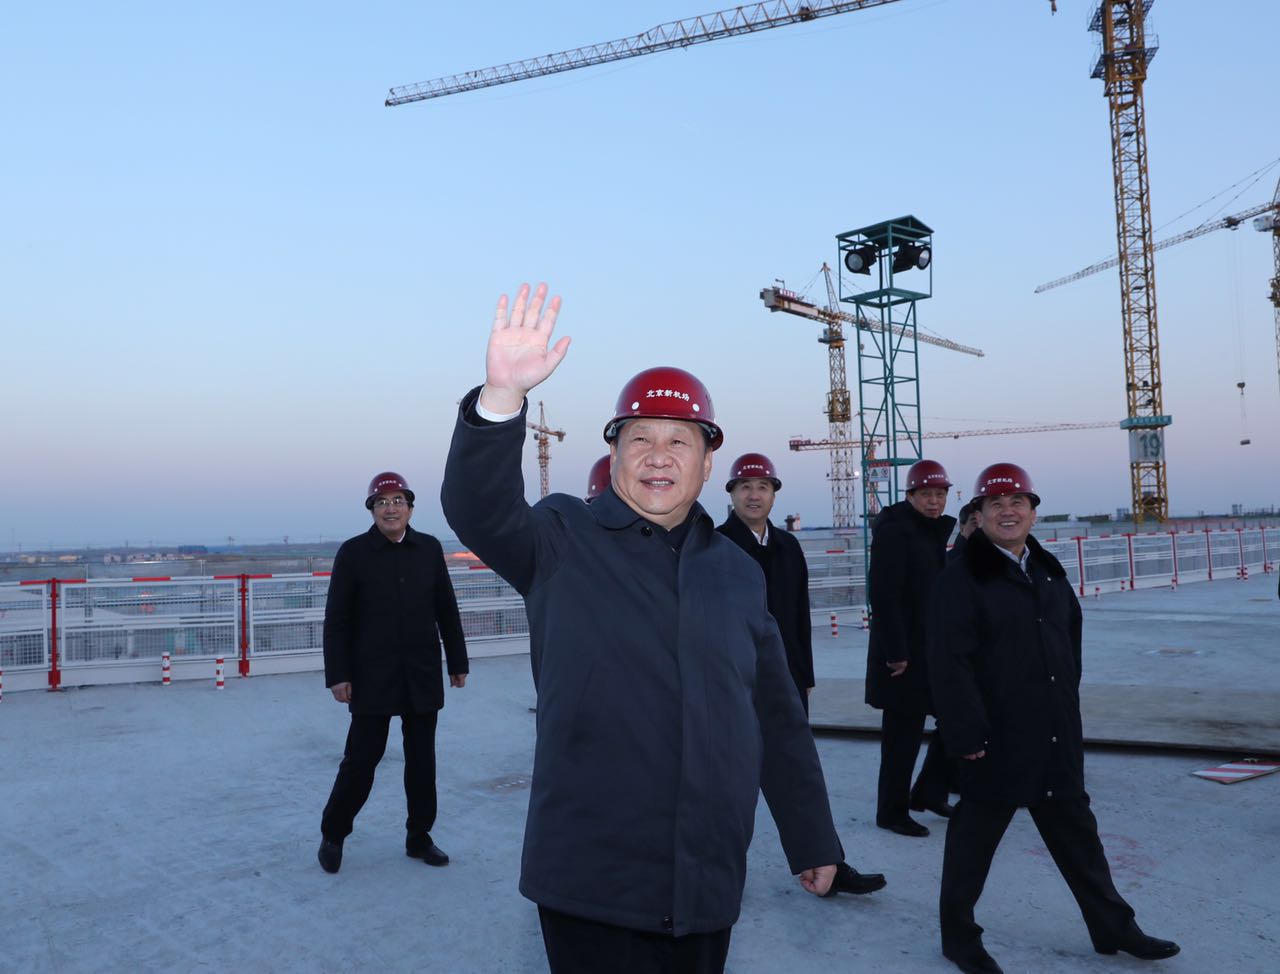 Chinese President Xi Jinping inspects the construction site of the new international airport in Beijing, capital of China, Feb. 23, 2017. [Photo: Xinhua/Lan Hongguang]